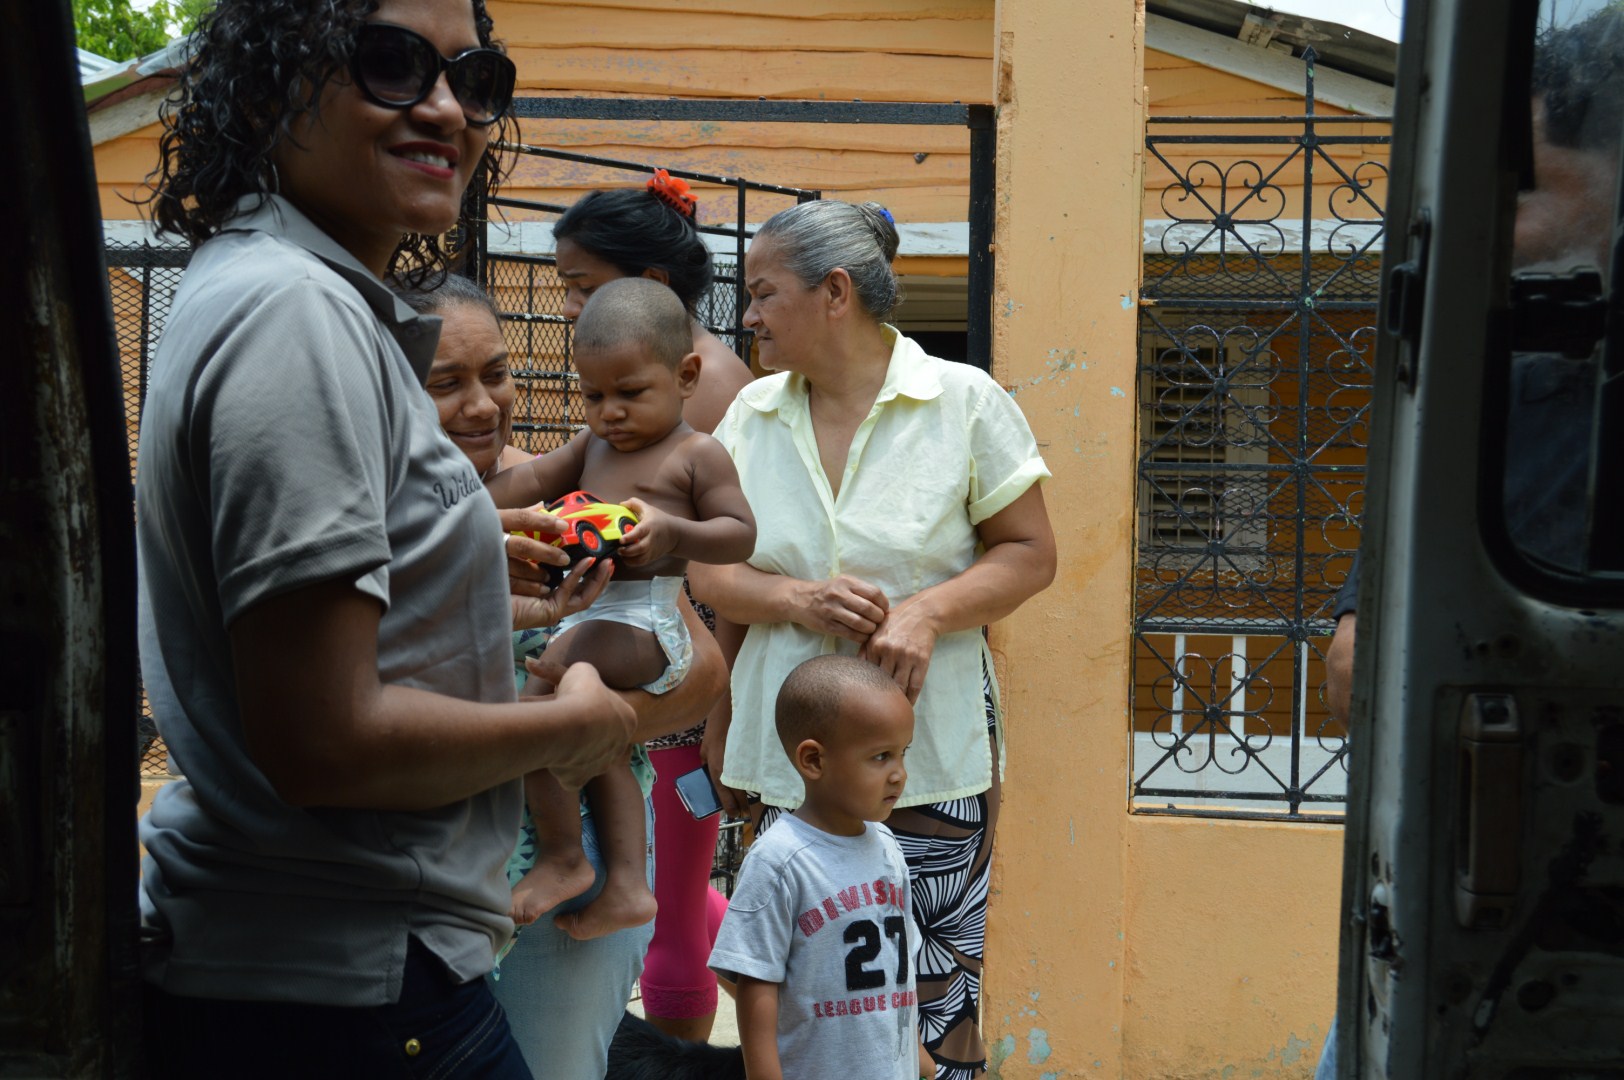 Our staff giving a toy to a child carried by a woman; other women and a child around them